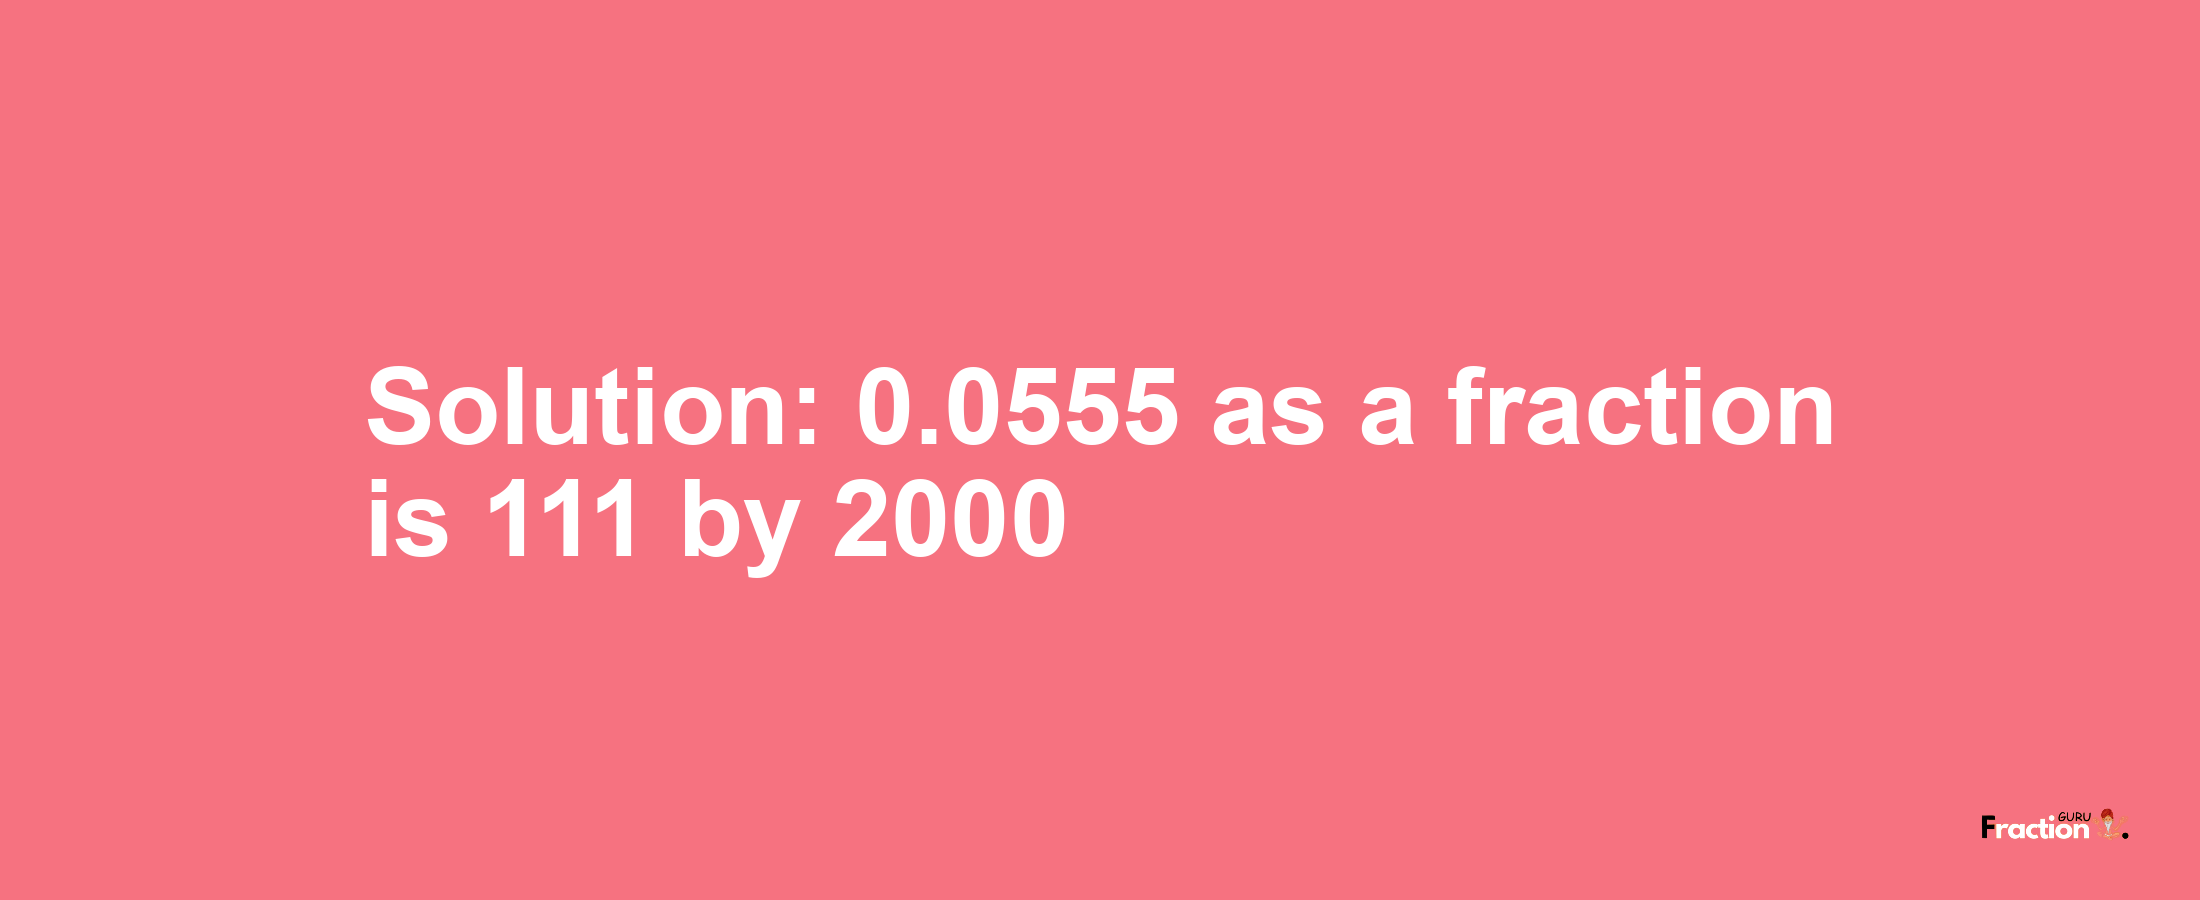 Solution:0.0555 as a fraction is 111/2000